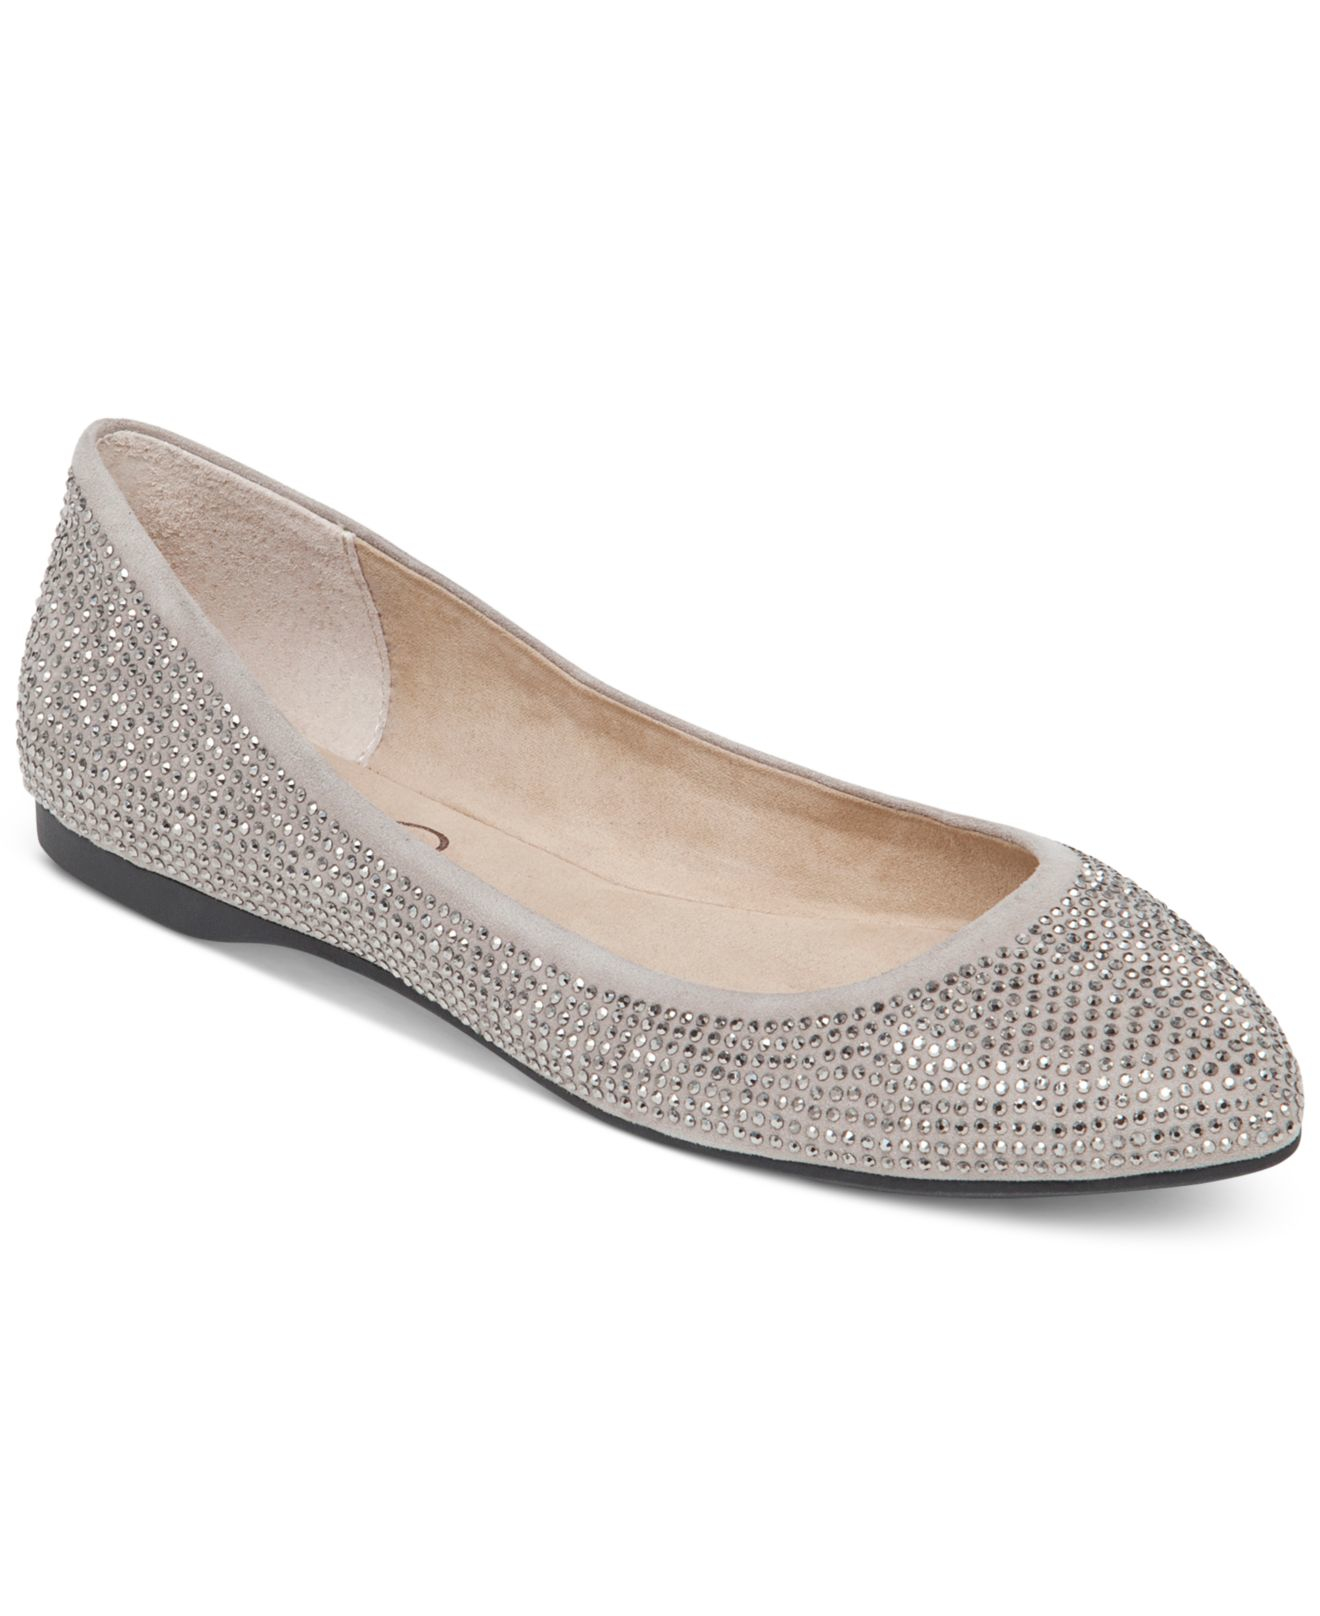 Lyst - Jessica Simpson Labelle Embellished Pointed-toe Flats in Gray